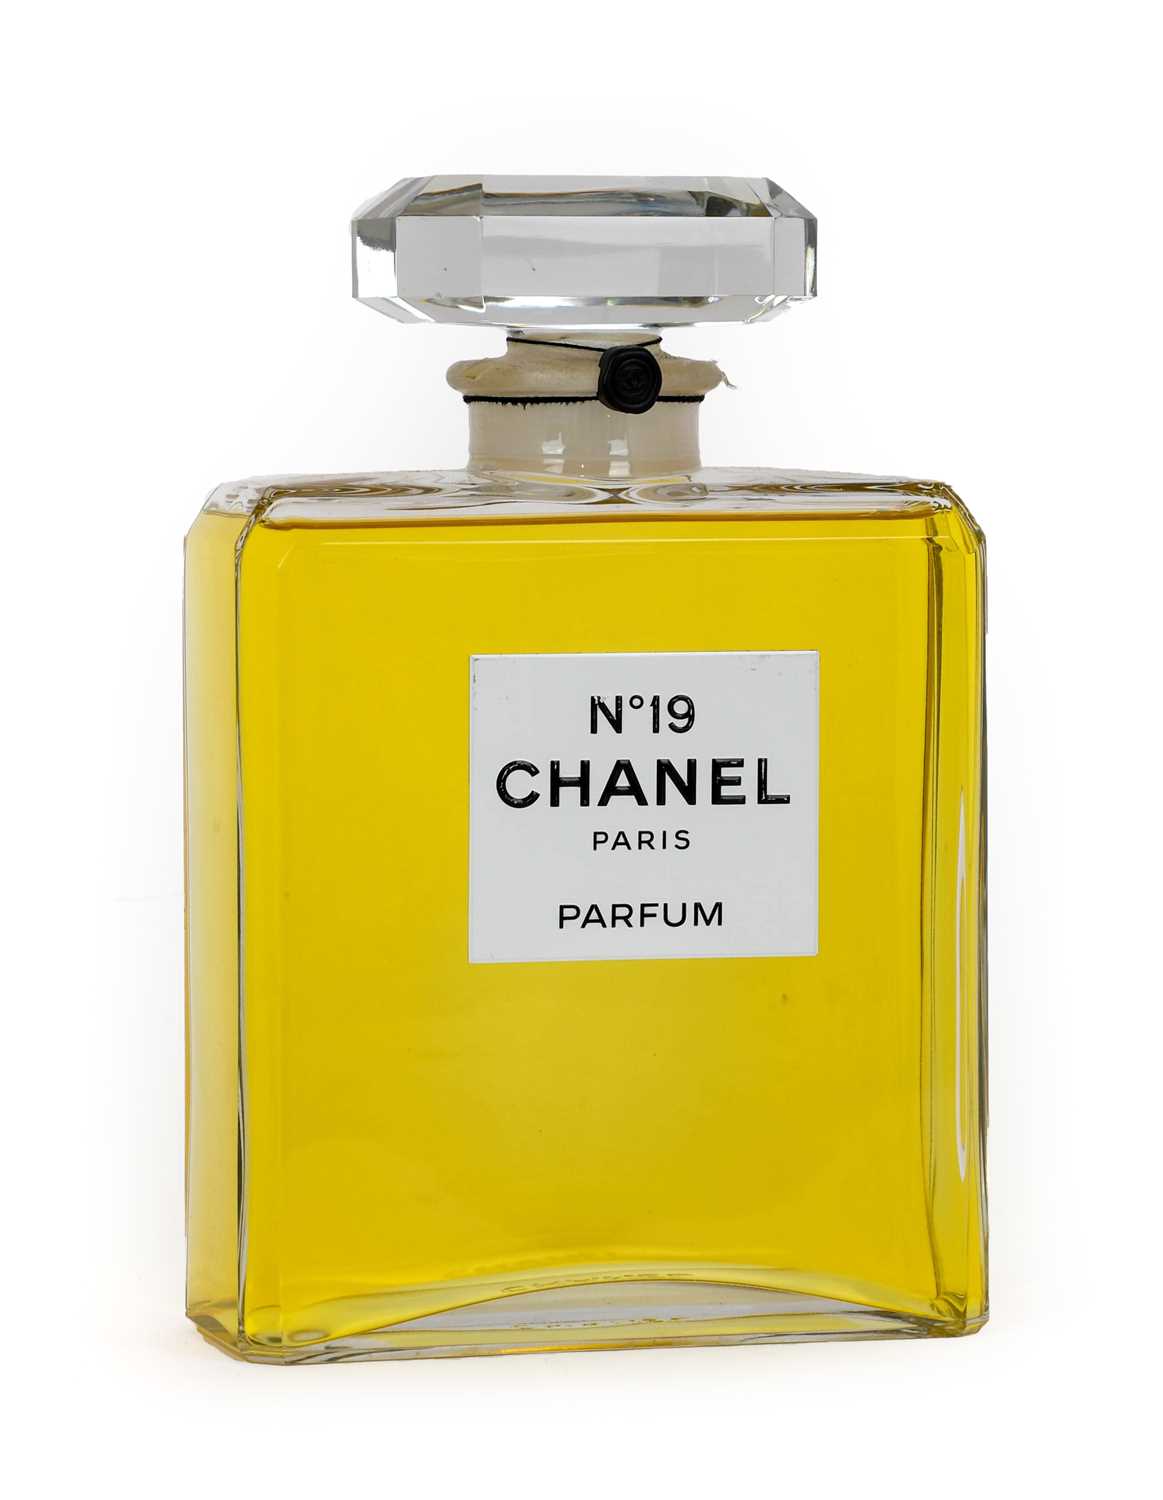 Lot 3010 - Chanel No.19 Large Advertising Display Dummy...